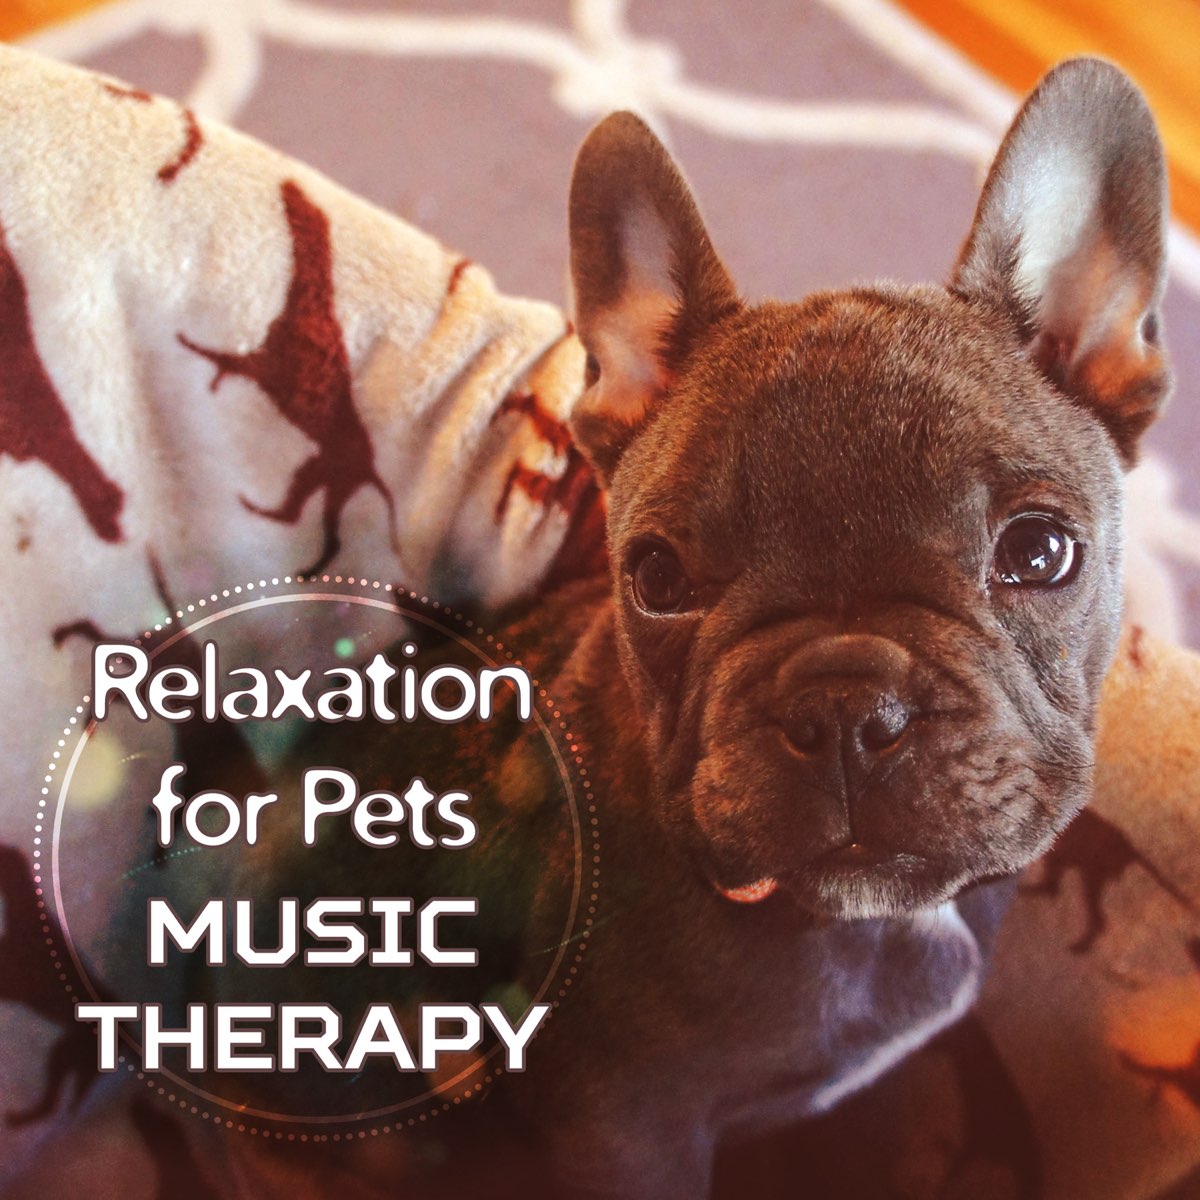 Pets музыка. Music Therapy for Cats. Музыка для Petpet.